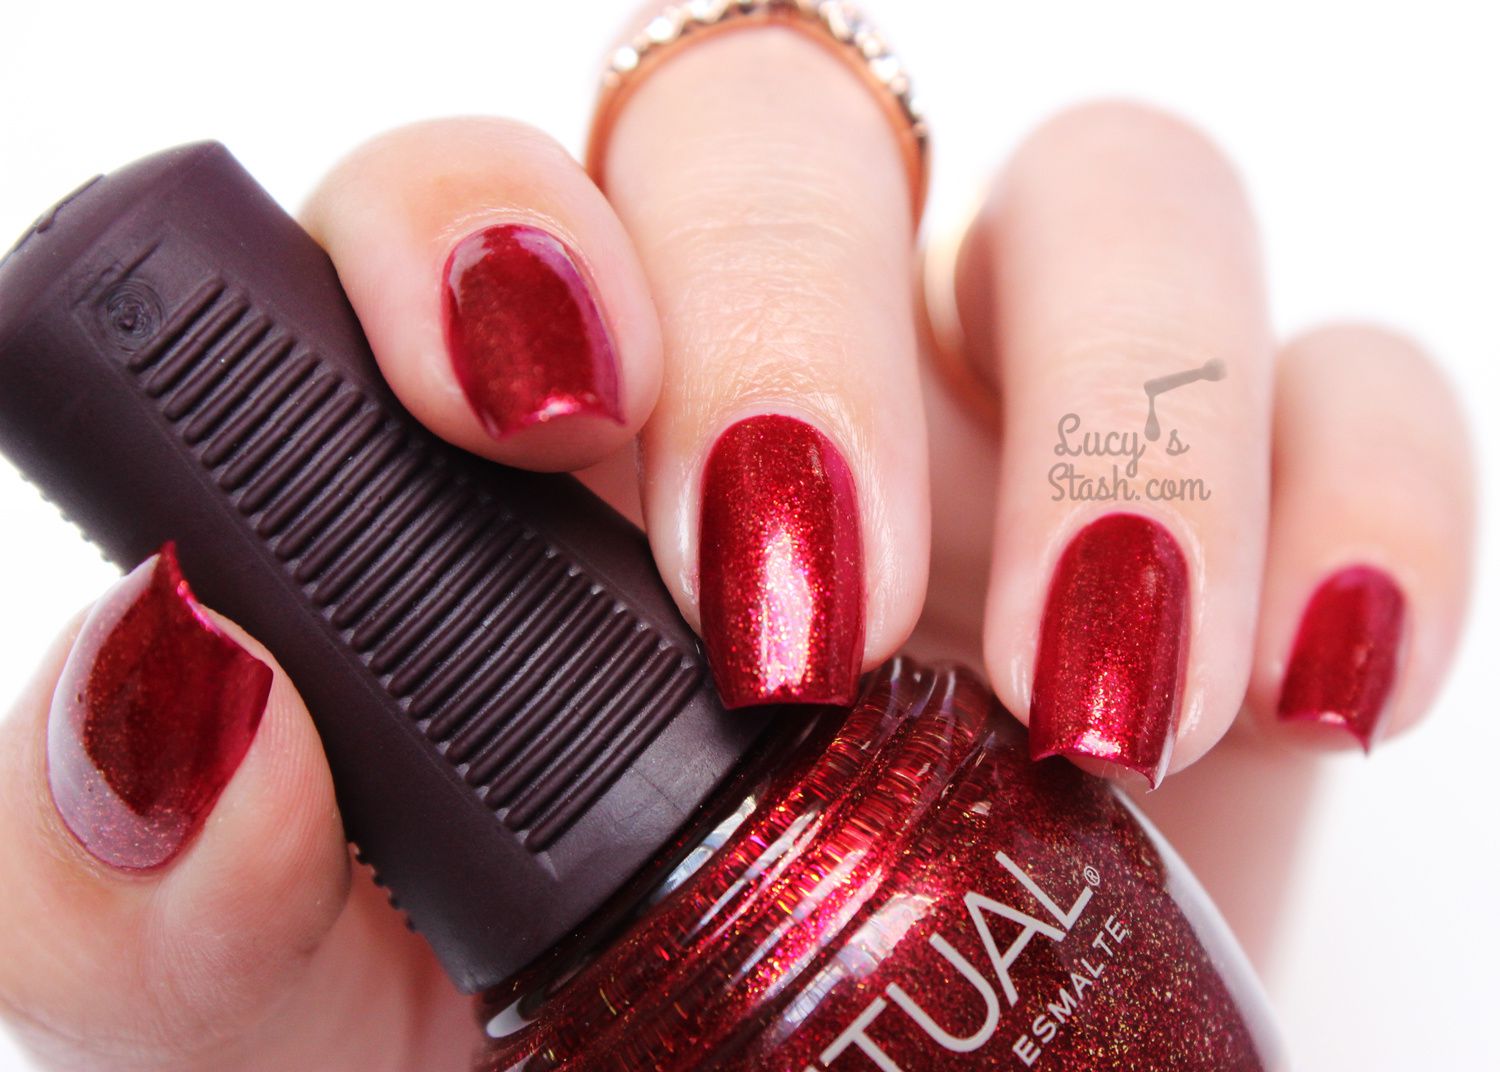 SpaRitual Artisan | Pause Collection Autumn 2015 - Review &amp; Swatches